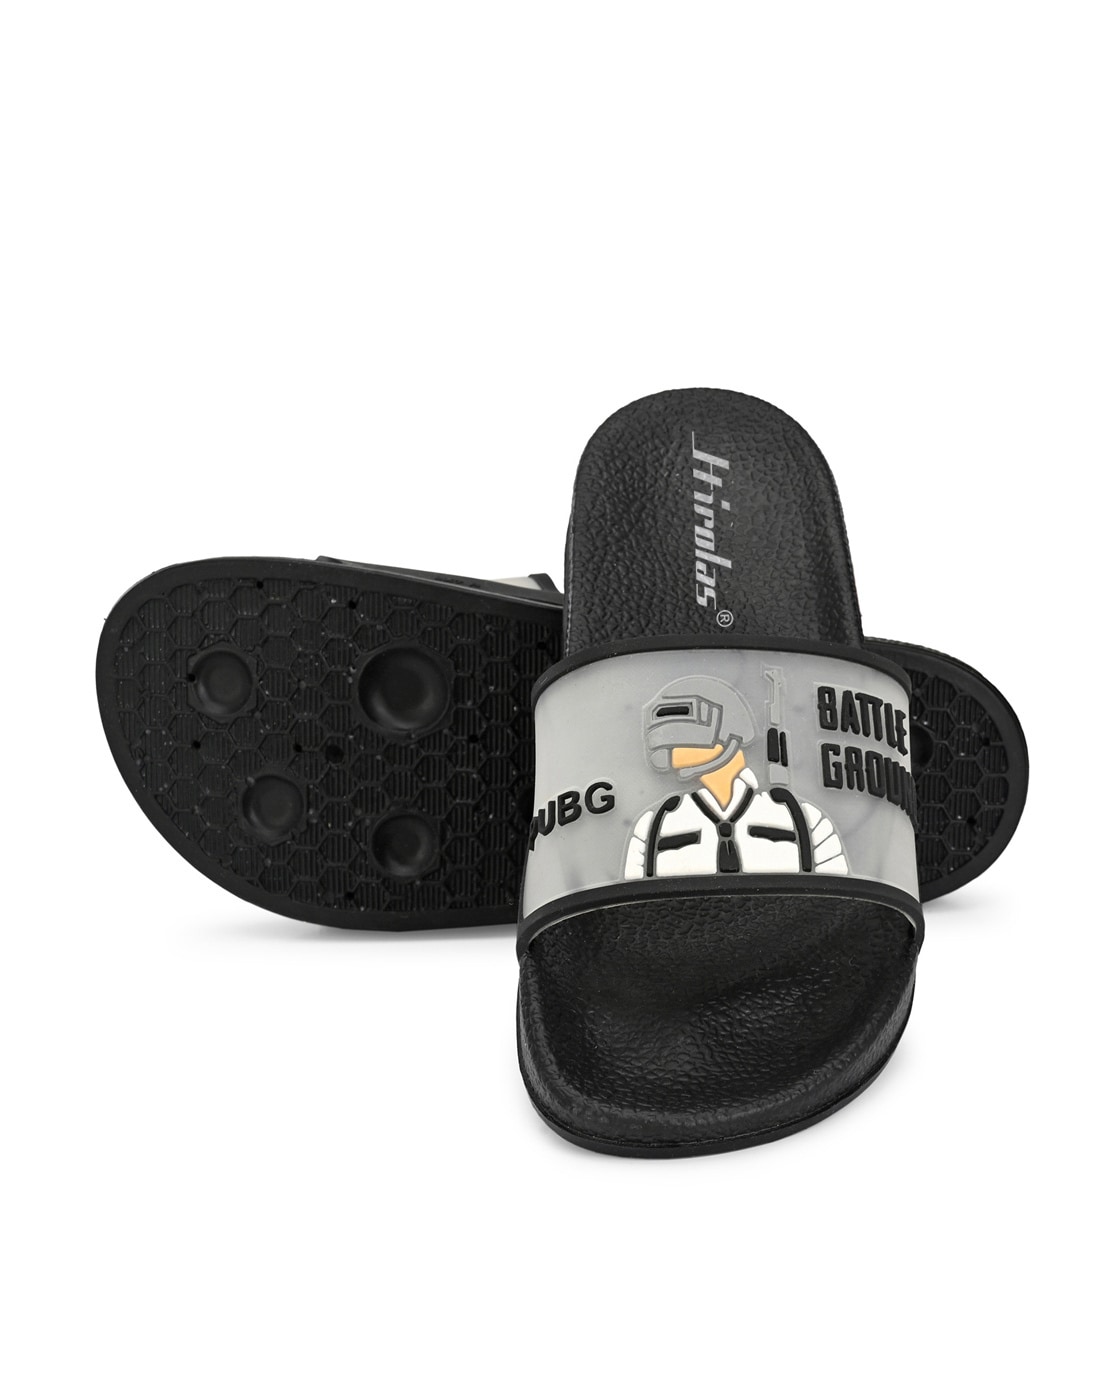 Buy Slides/Slippers Flip Flops for Boys and Girls (PubG) Blue-27 at  Amazon.in